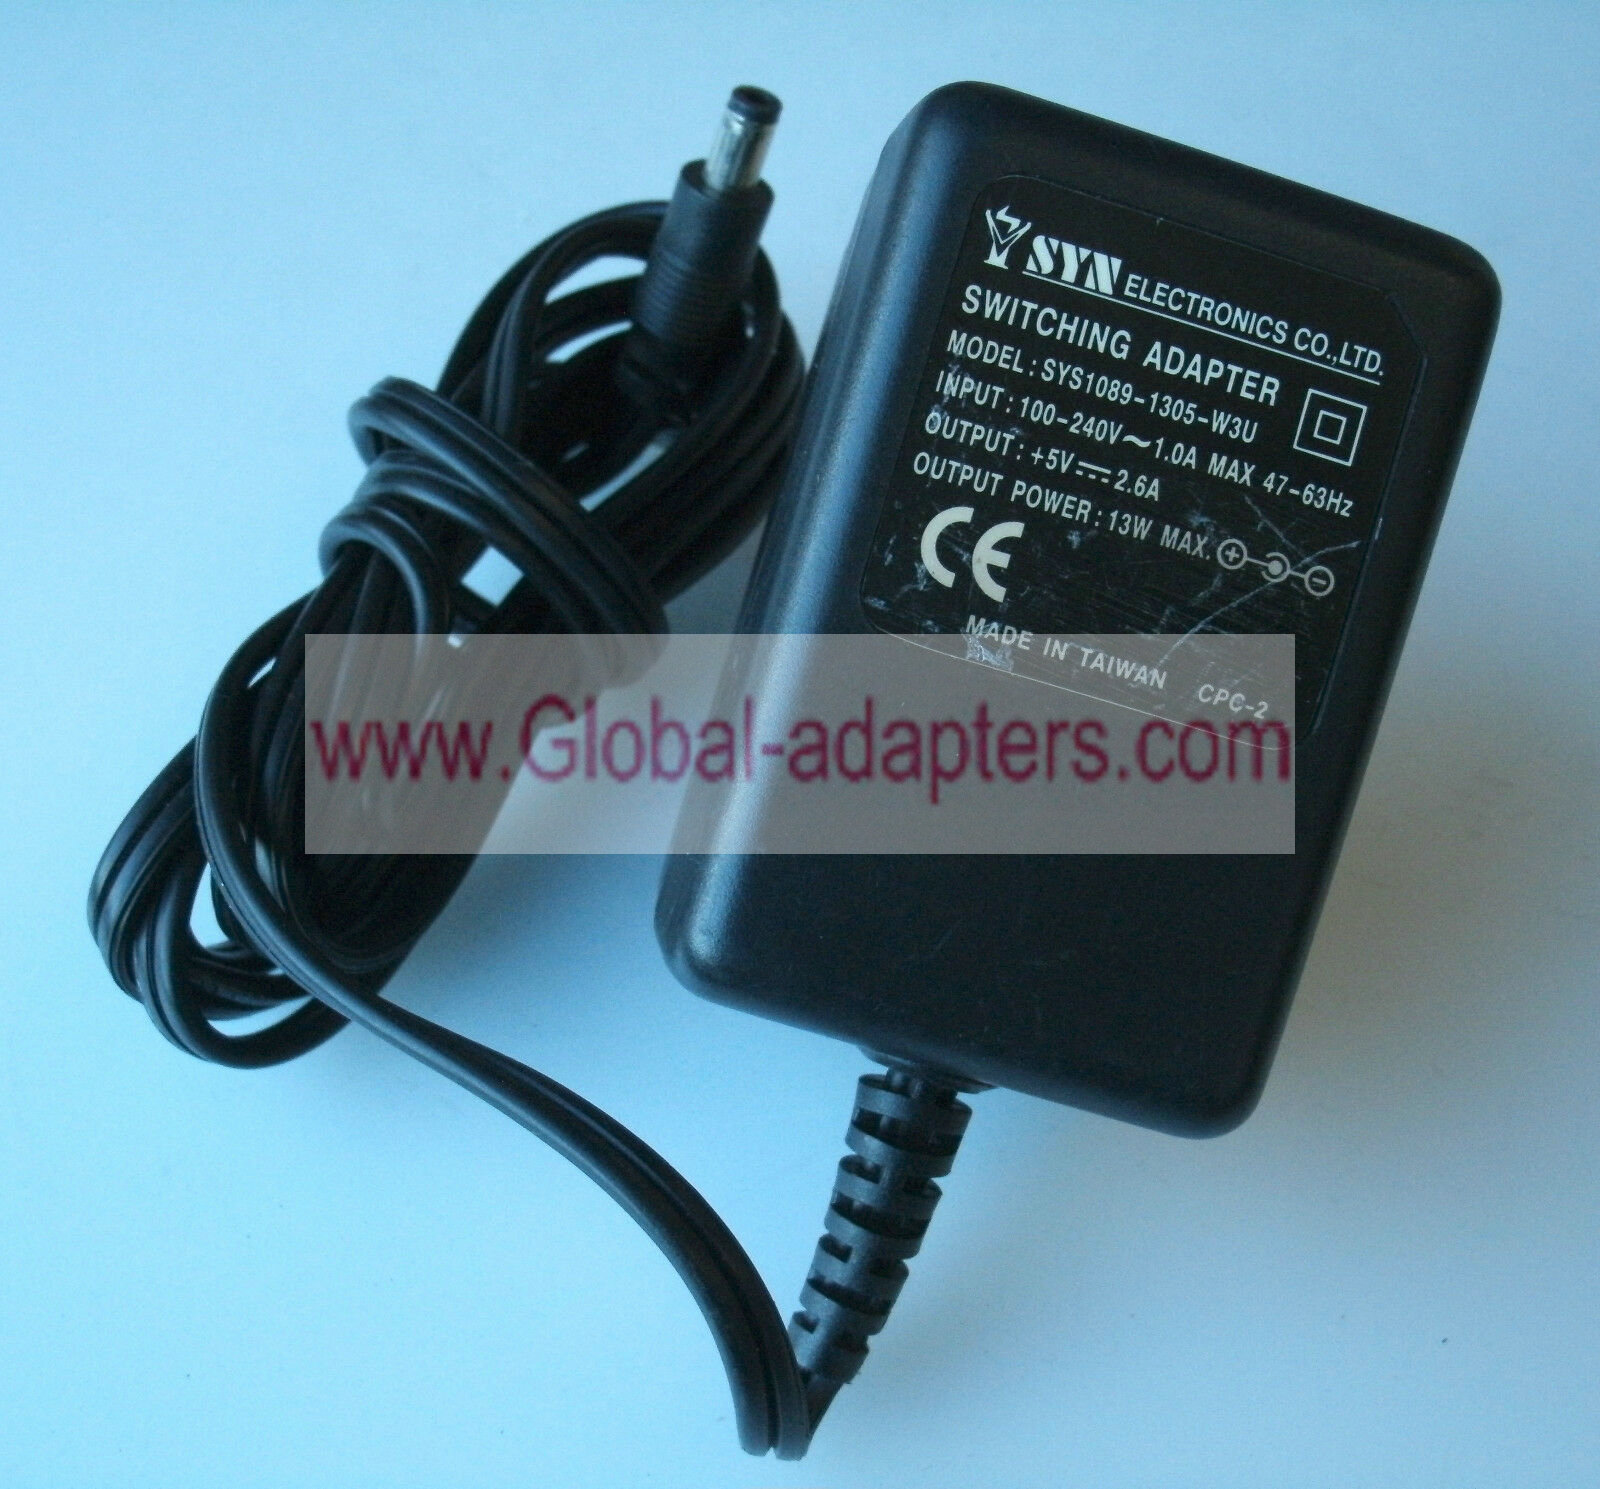 NEW SYN ELECTRONICS SYS1089-1305-W3U 5V 2.6A SWITCHING ADAPTER UK PLUG - Click Image to Close